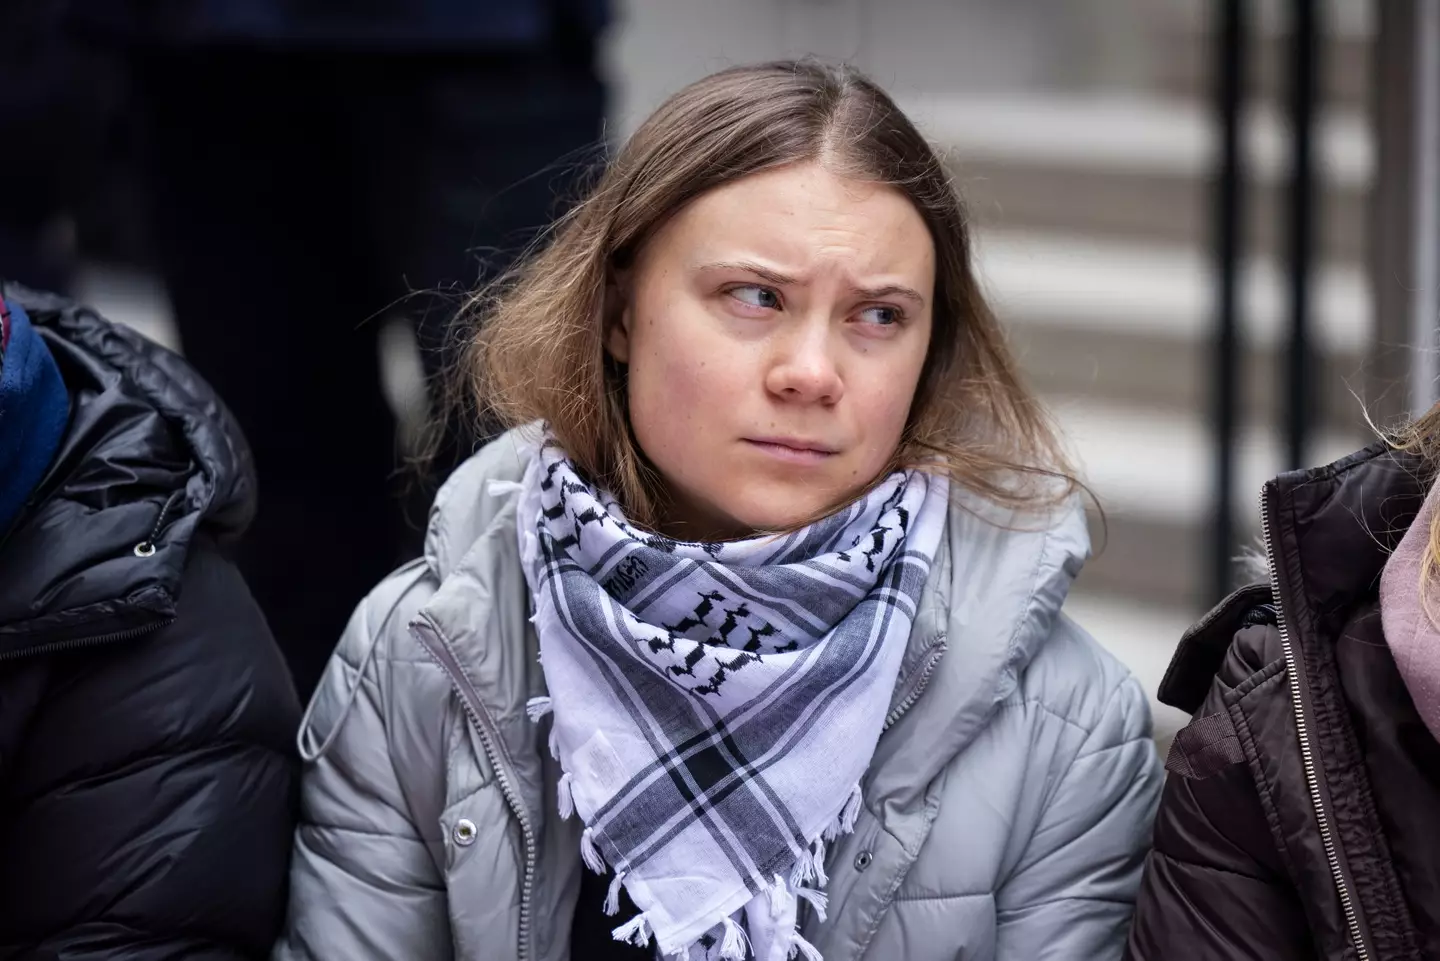 Greta Thunberg wouldn't be happy with Diddly Squat Farm, Clarkson says (Michael Campanella/Getty Images)